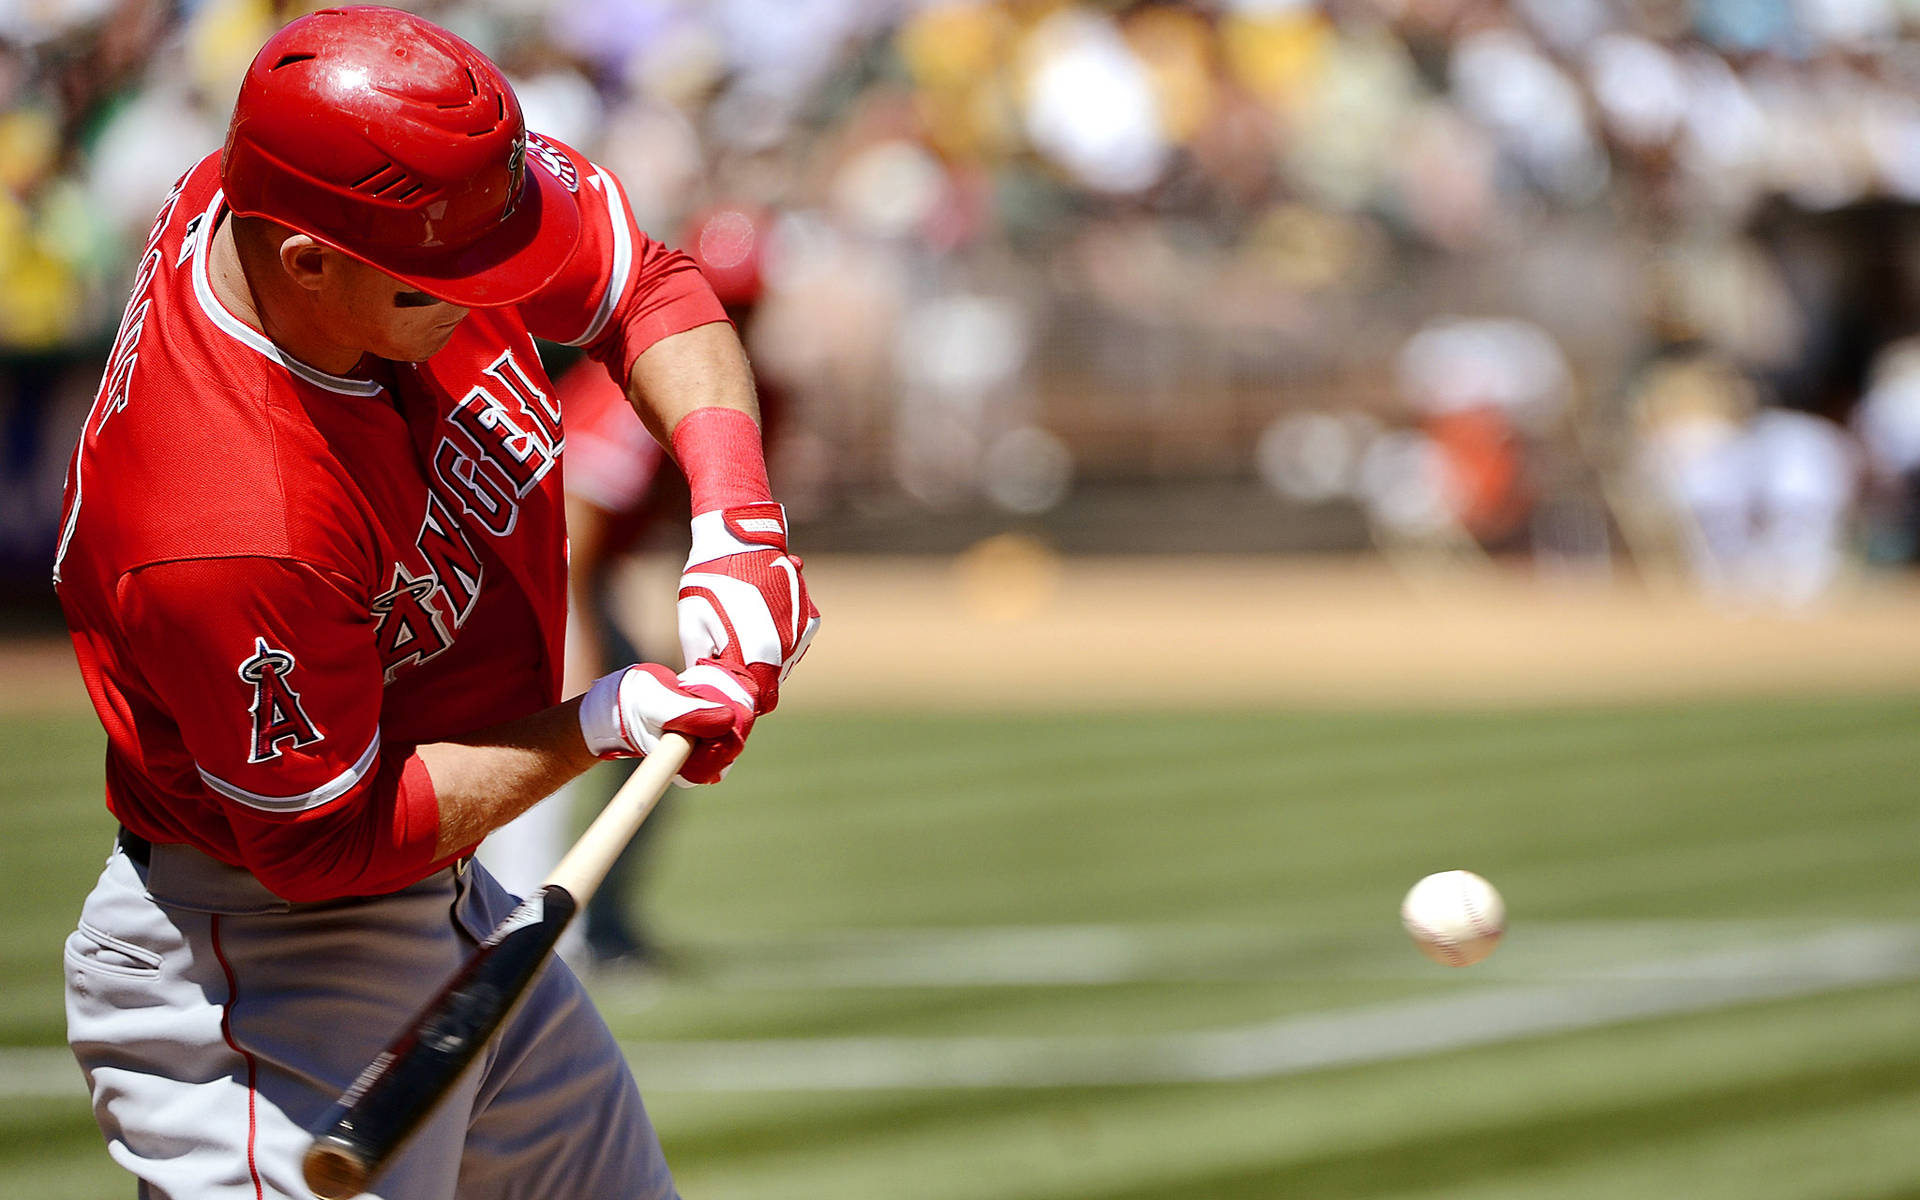 Mike Trout Hitting The Ball Wallpaper